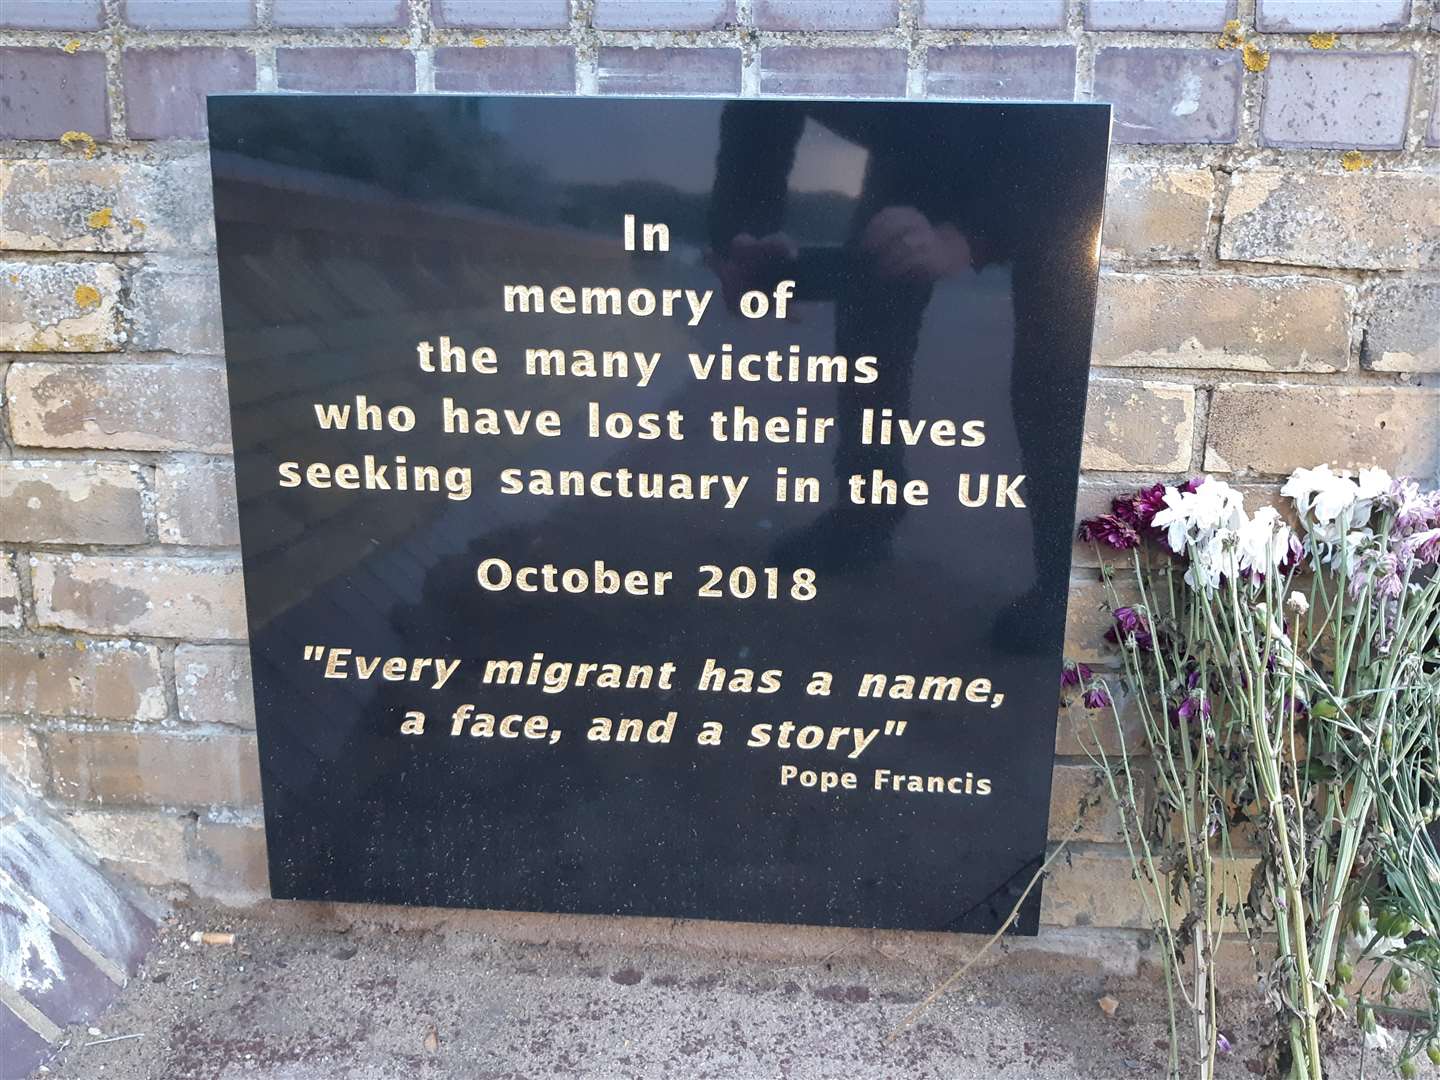 The new migrants' memorial at Dover Seafront